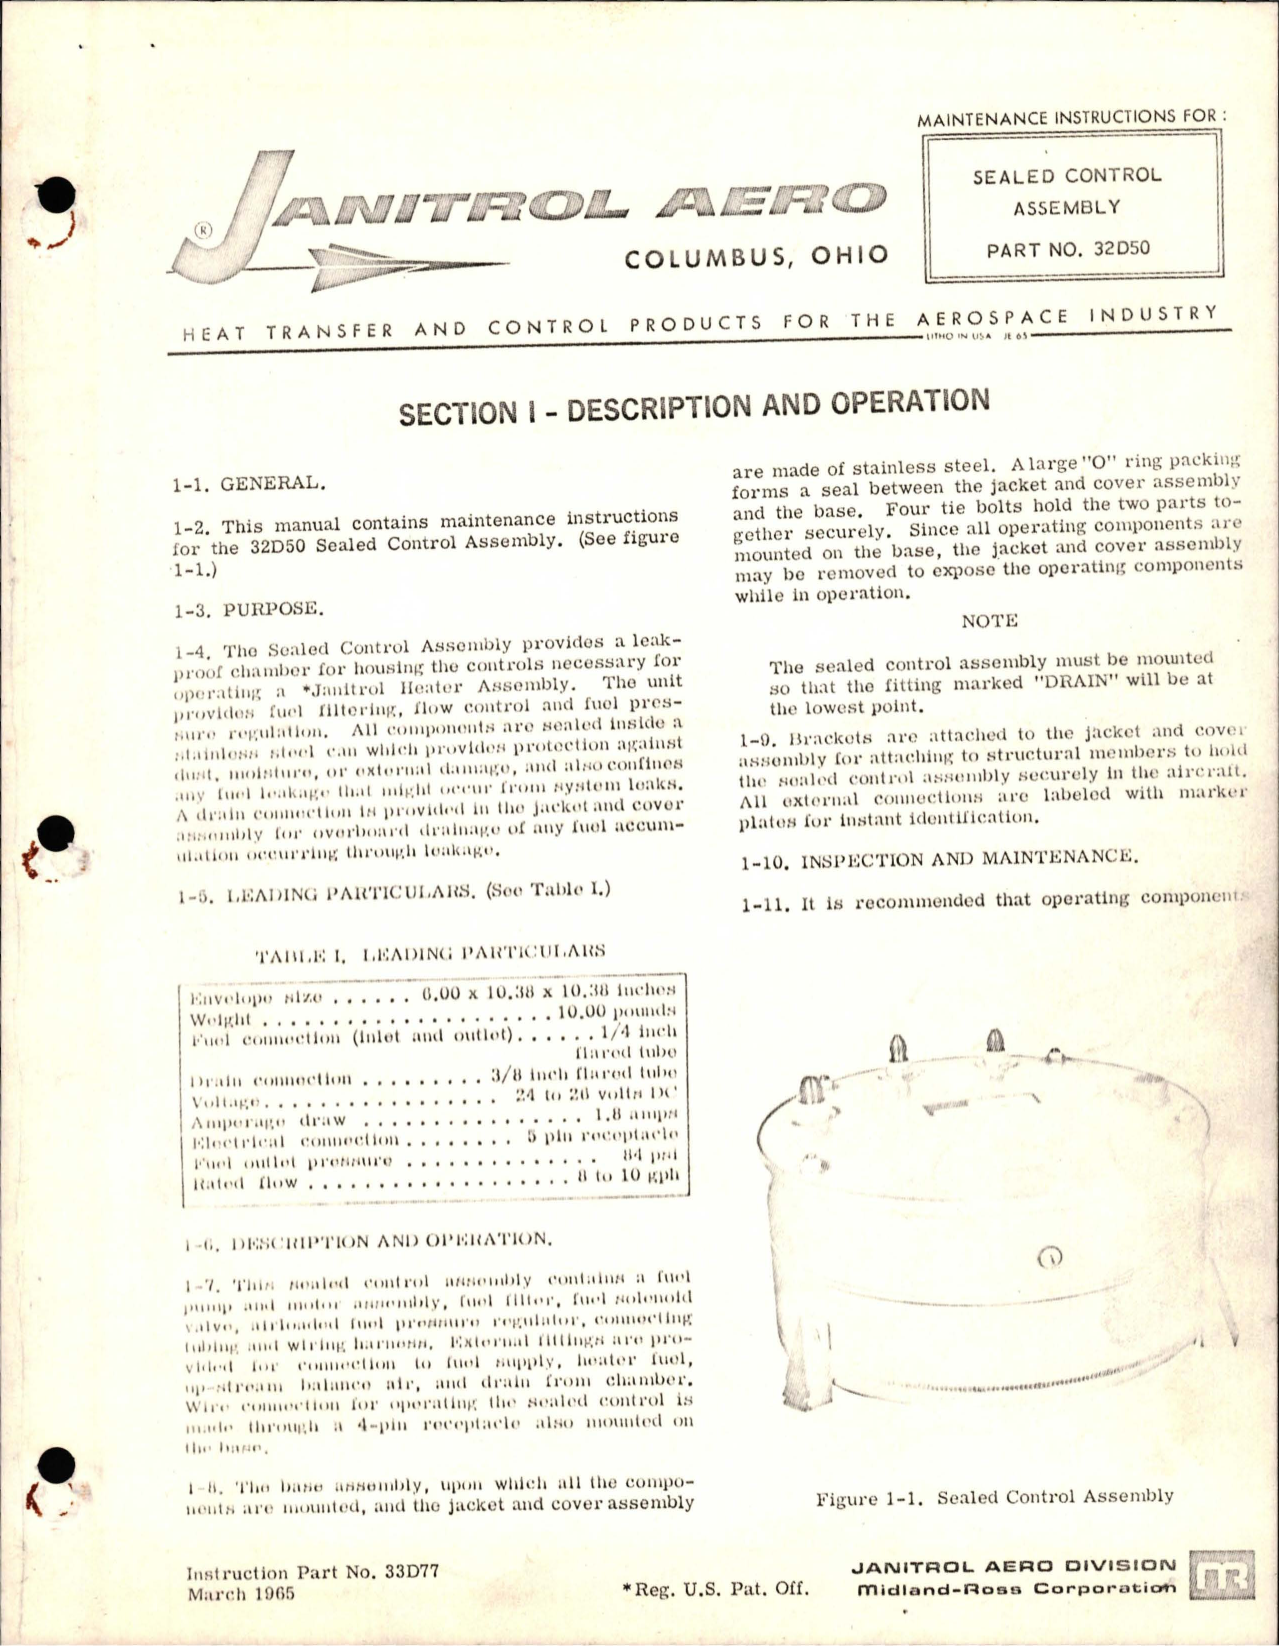 Sample page 1 from AirCorps Library document: Maintenance Instructions for Sealed Control Assembly - Part 32D50